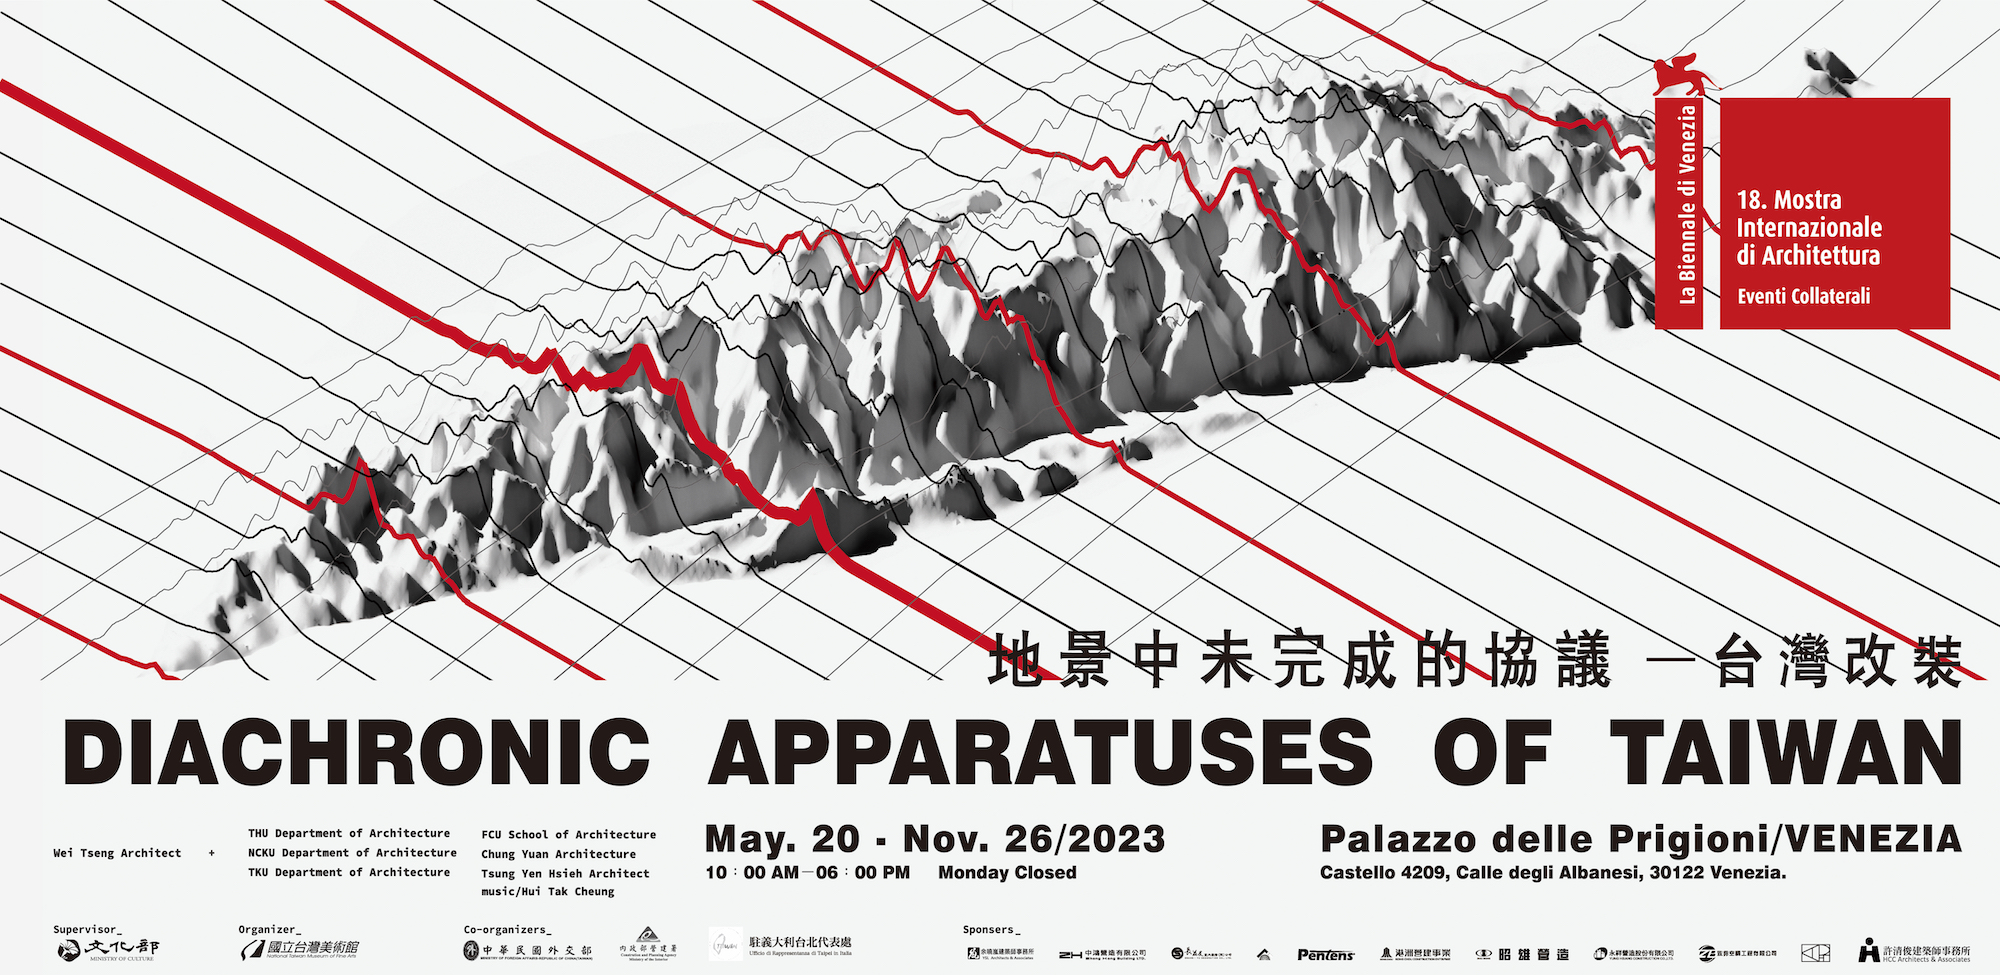 taiwan-collateral-event-of-biennale-architettura-2023